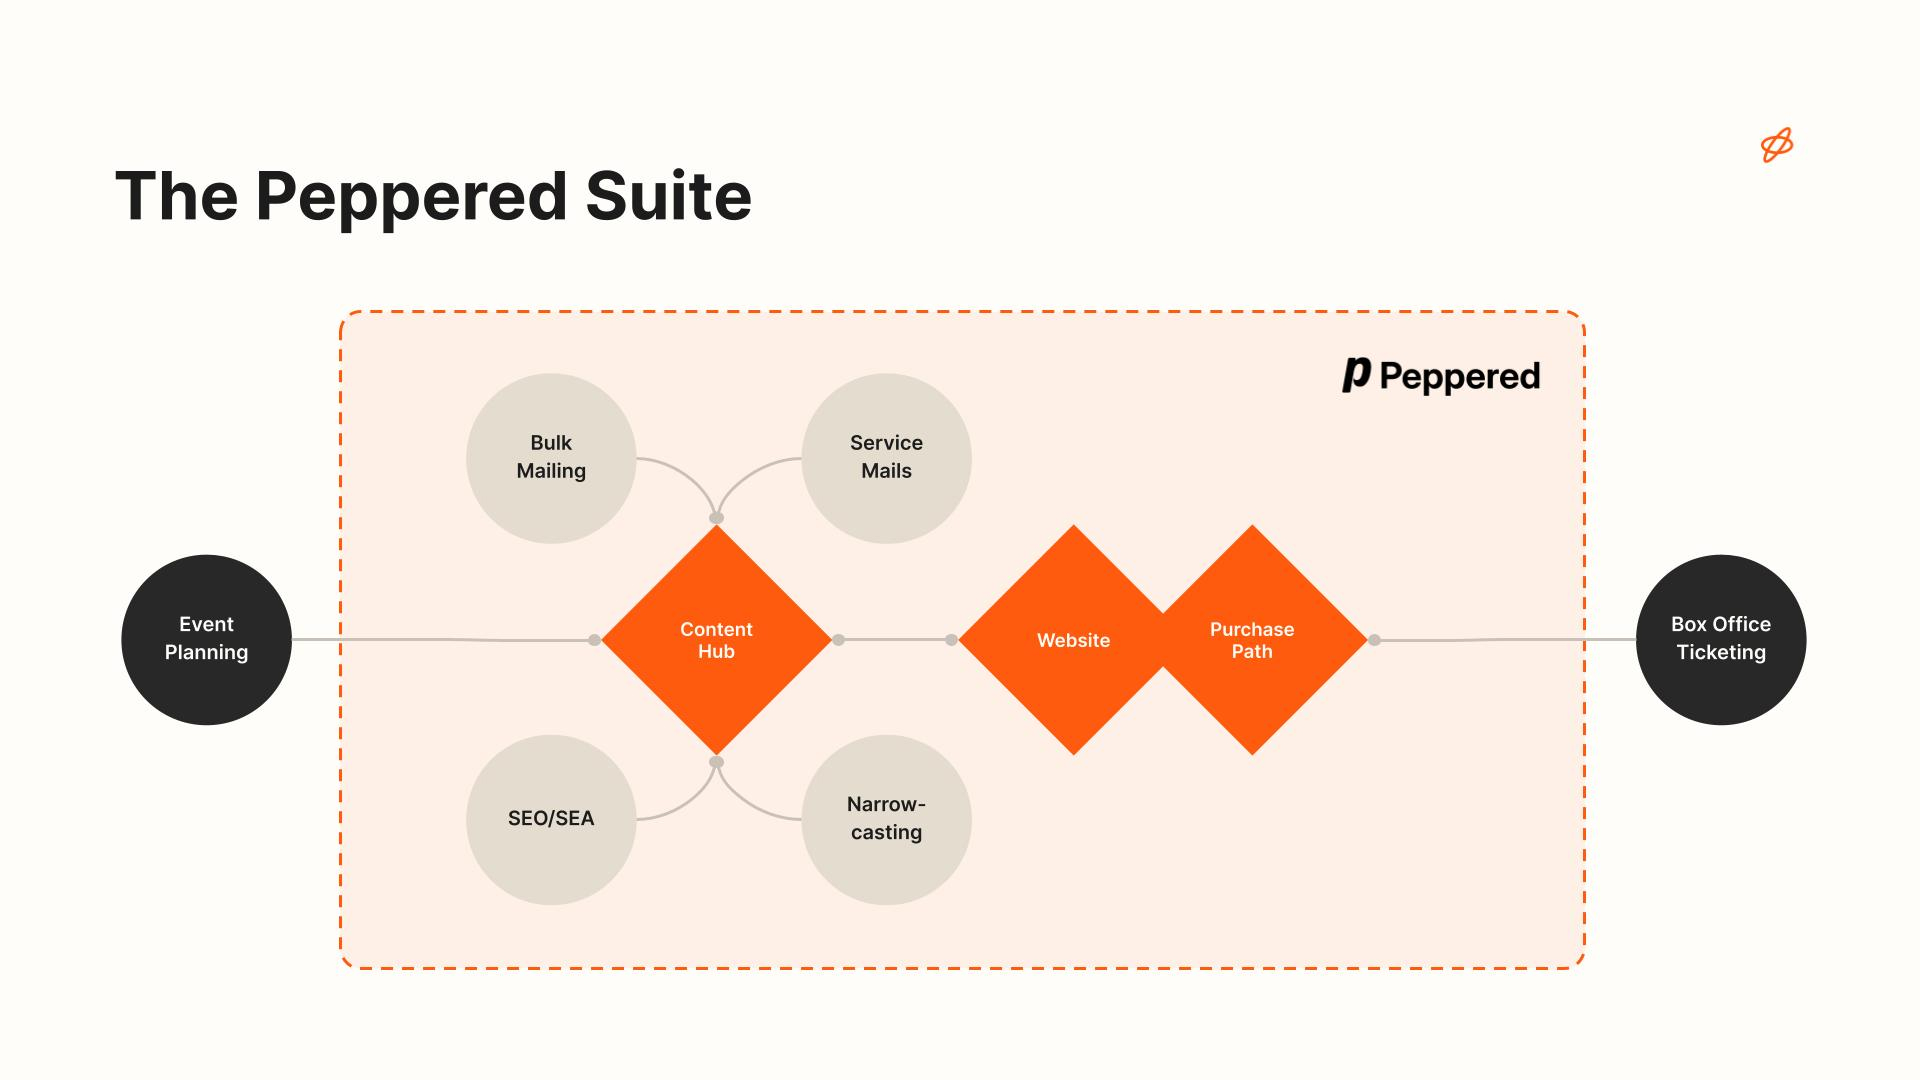 Peppered suite connects with event management and ticketing systems